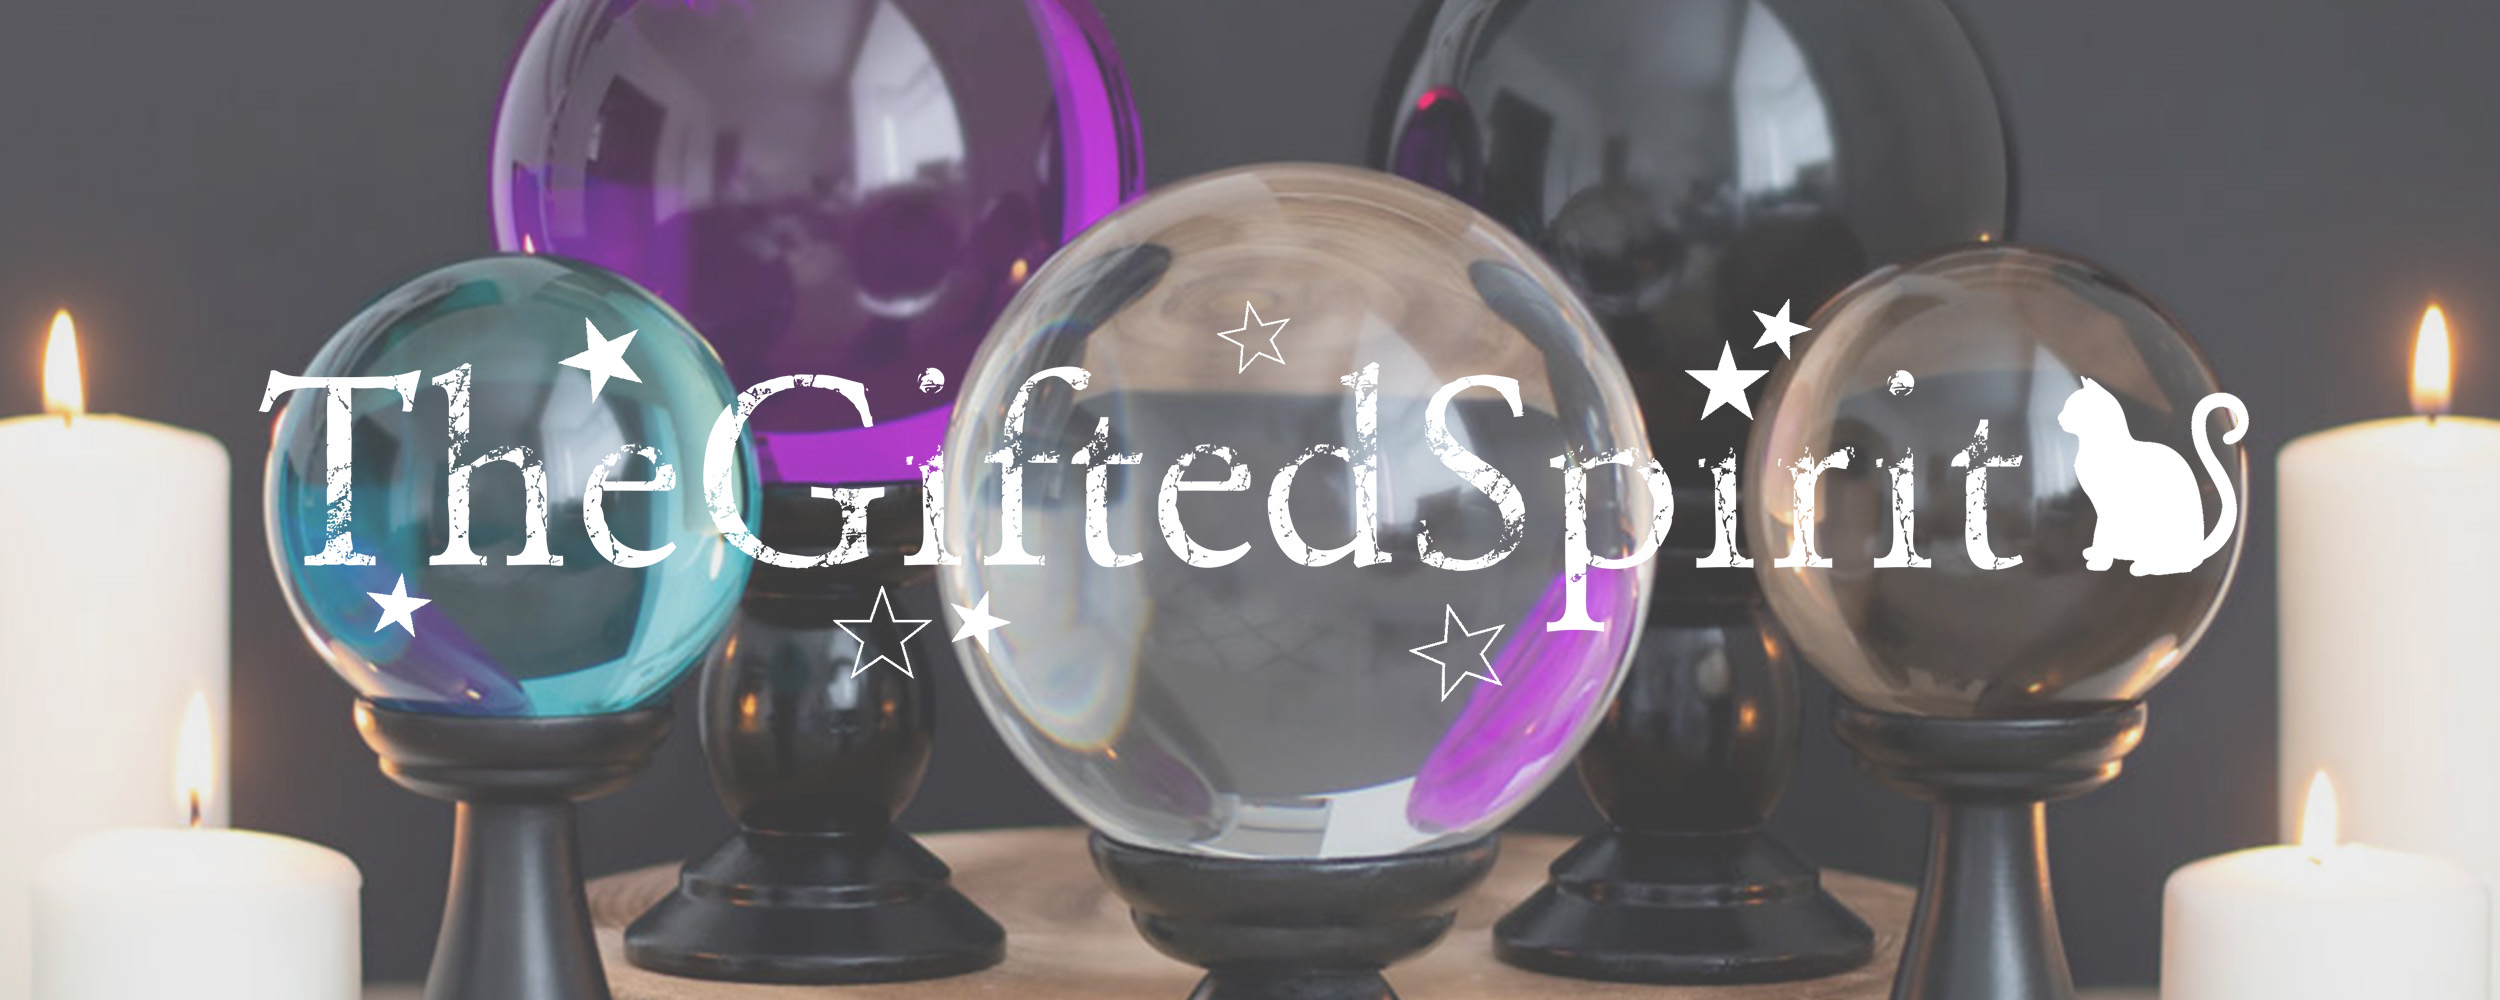 Visit the The Gifted Spirit